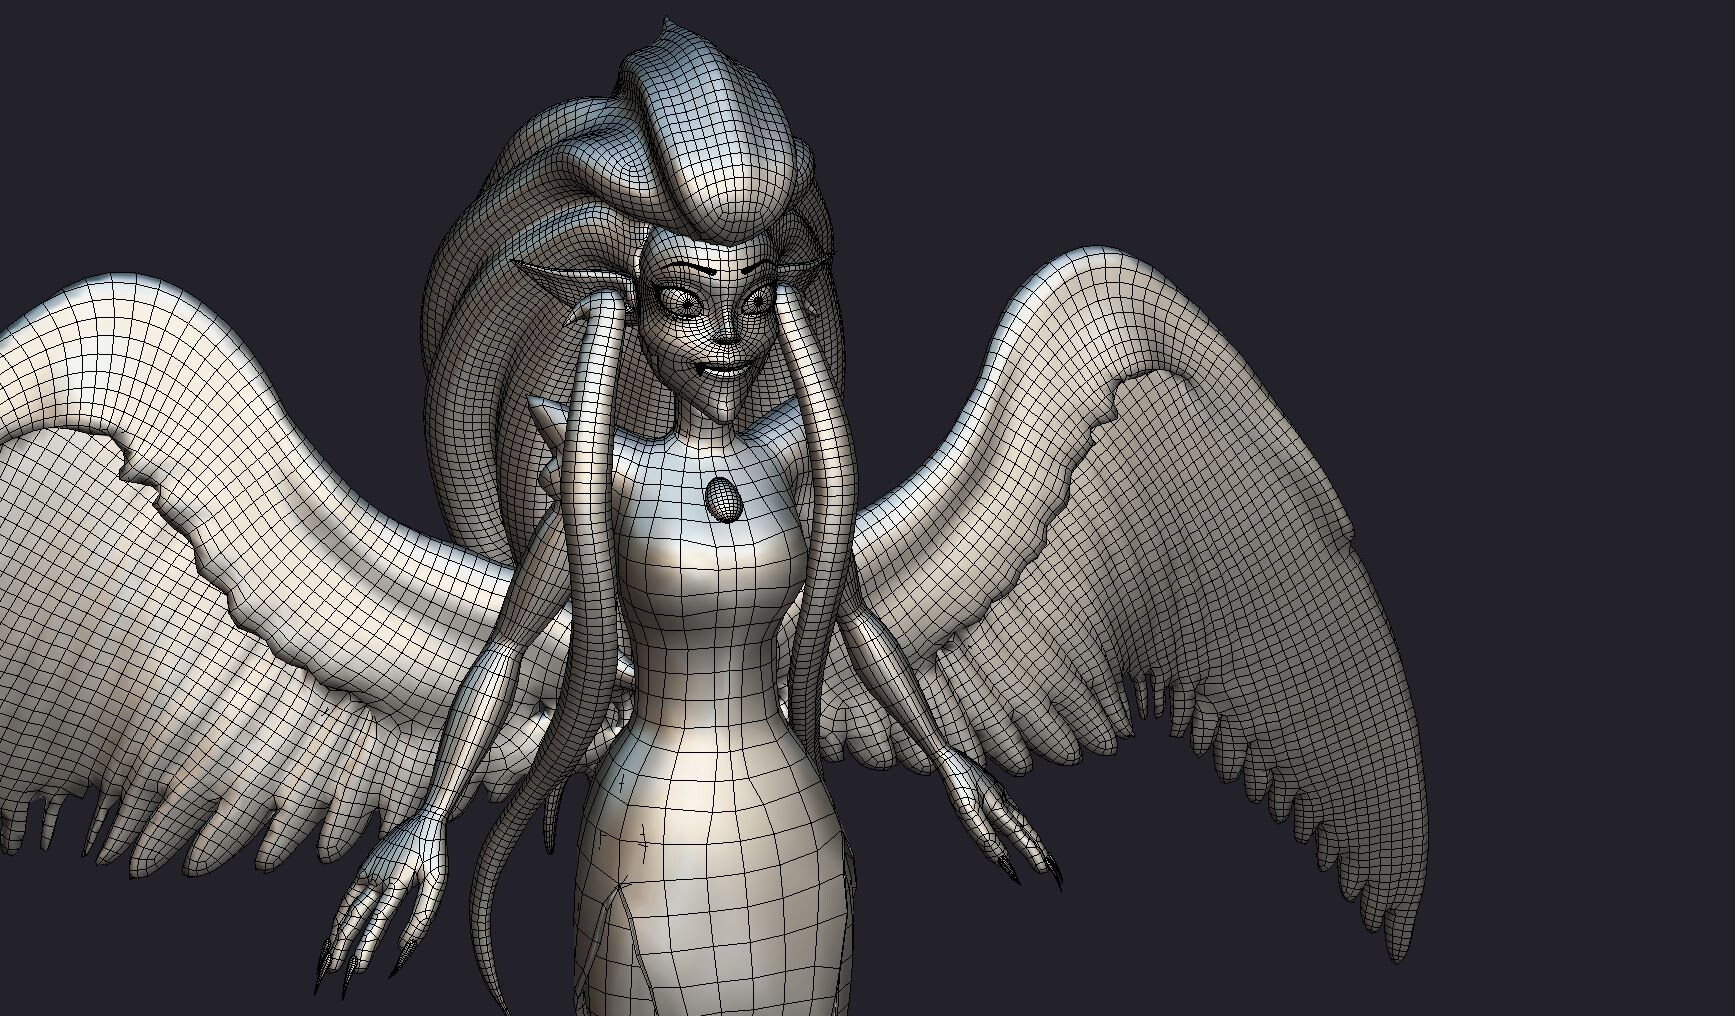 ArtStation - Textured 3D Model of Eda Clawthorne from The Owl House (WIP)